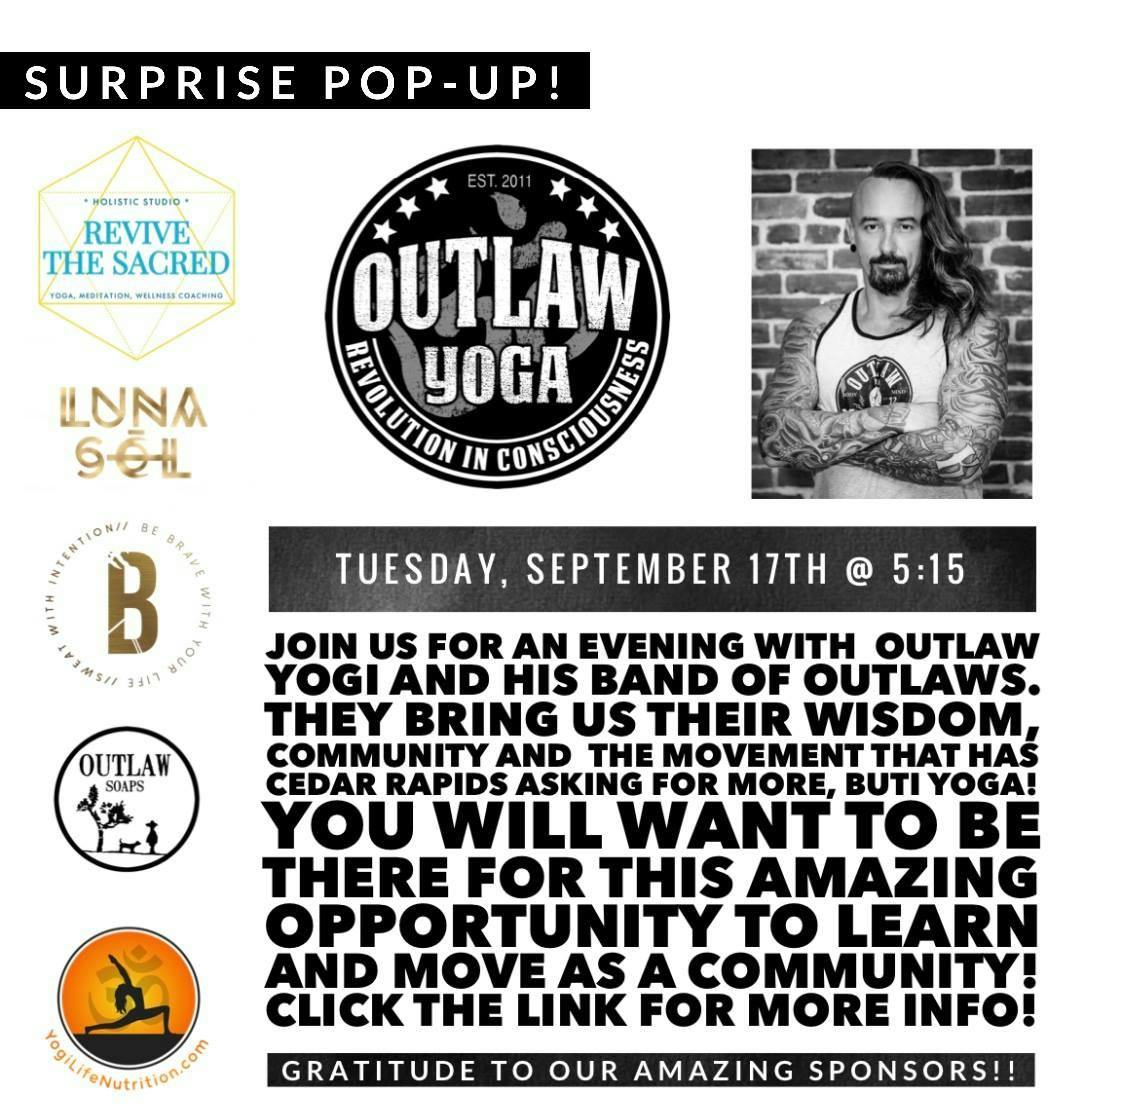 Surprise Pop-Up with Outlaw Yoga